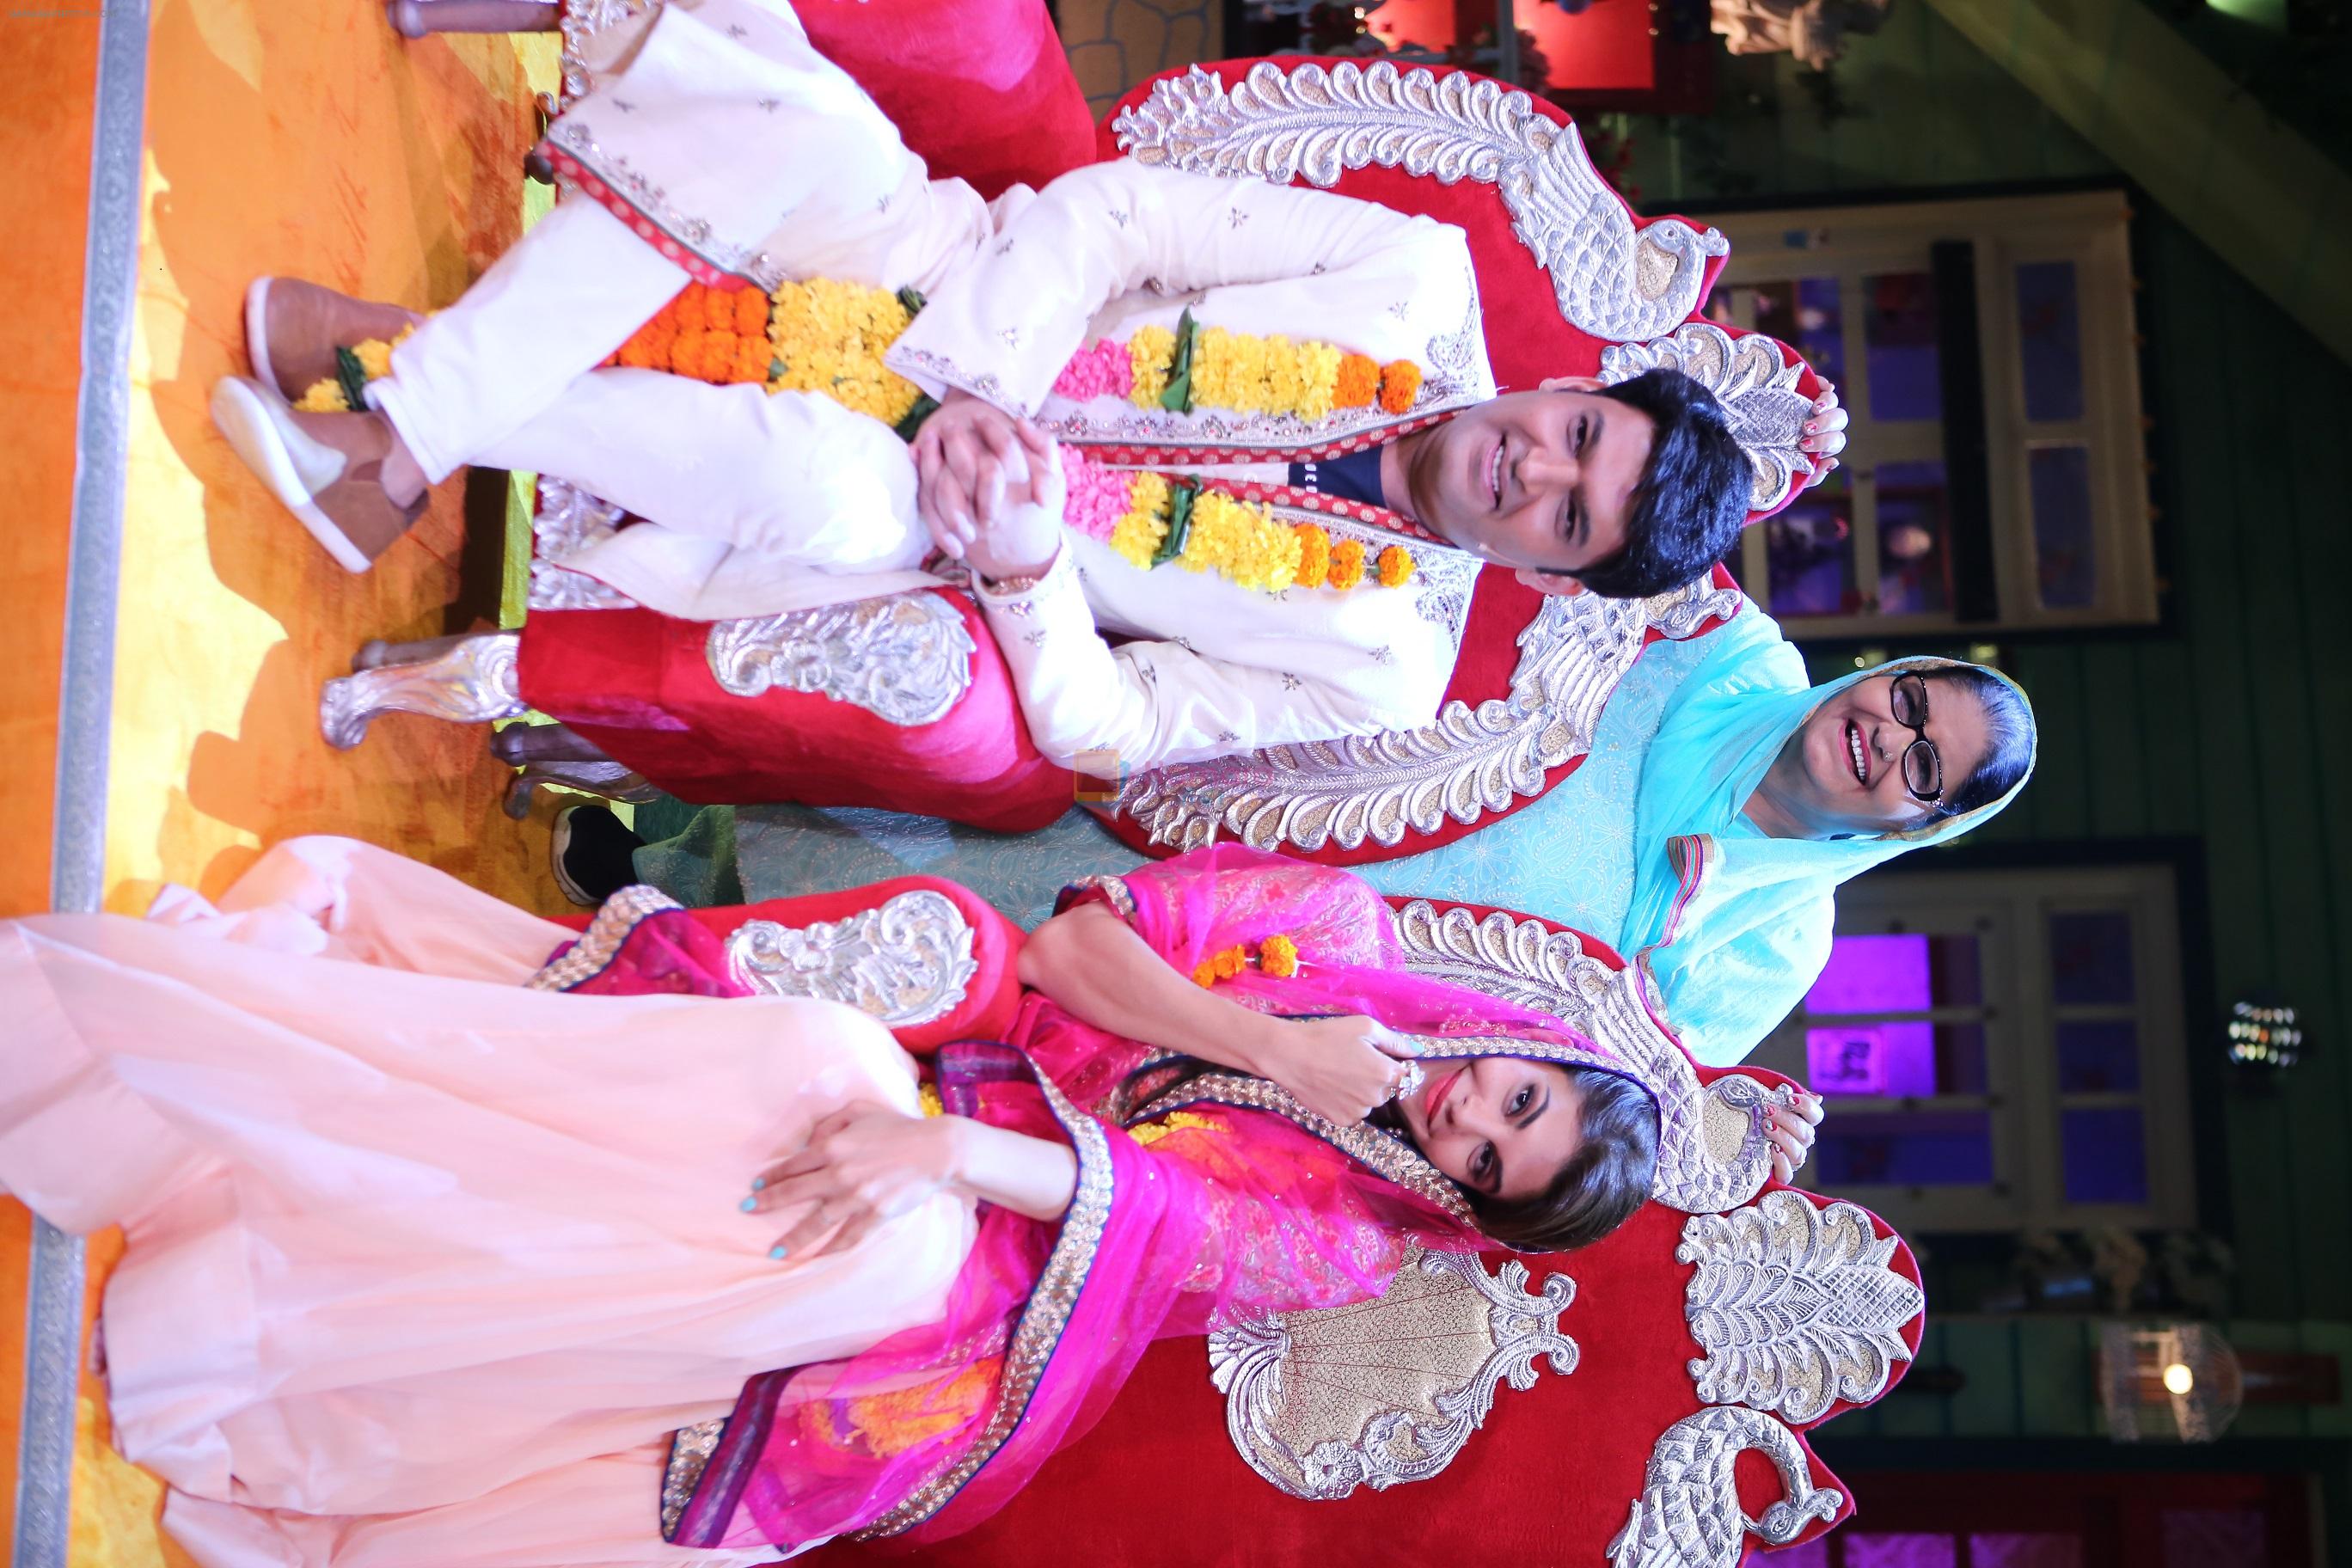 Kapil Sharma and Jacqueline Fernandez tie the knot on the sets of The Kapil Sharma Show on 10th Aug 2016